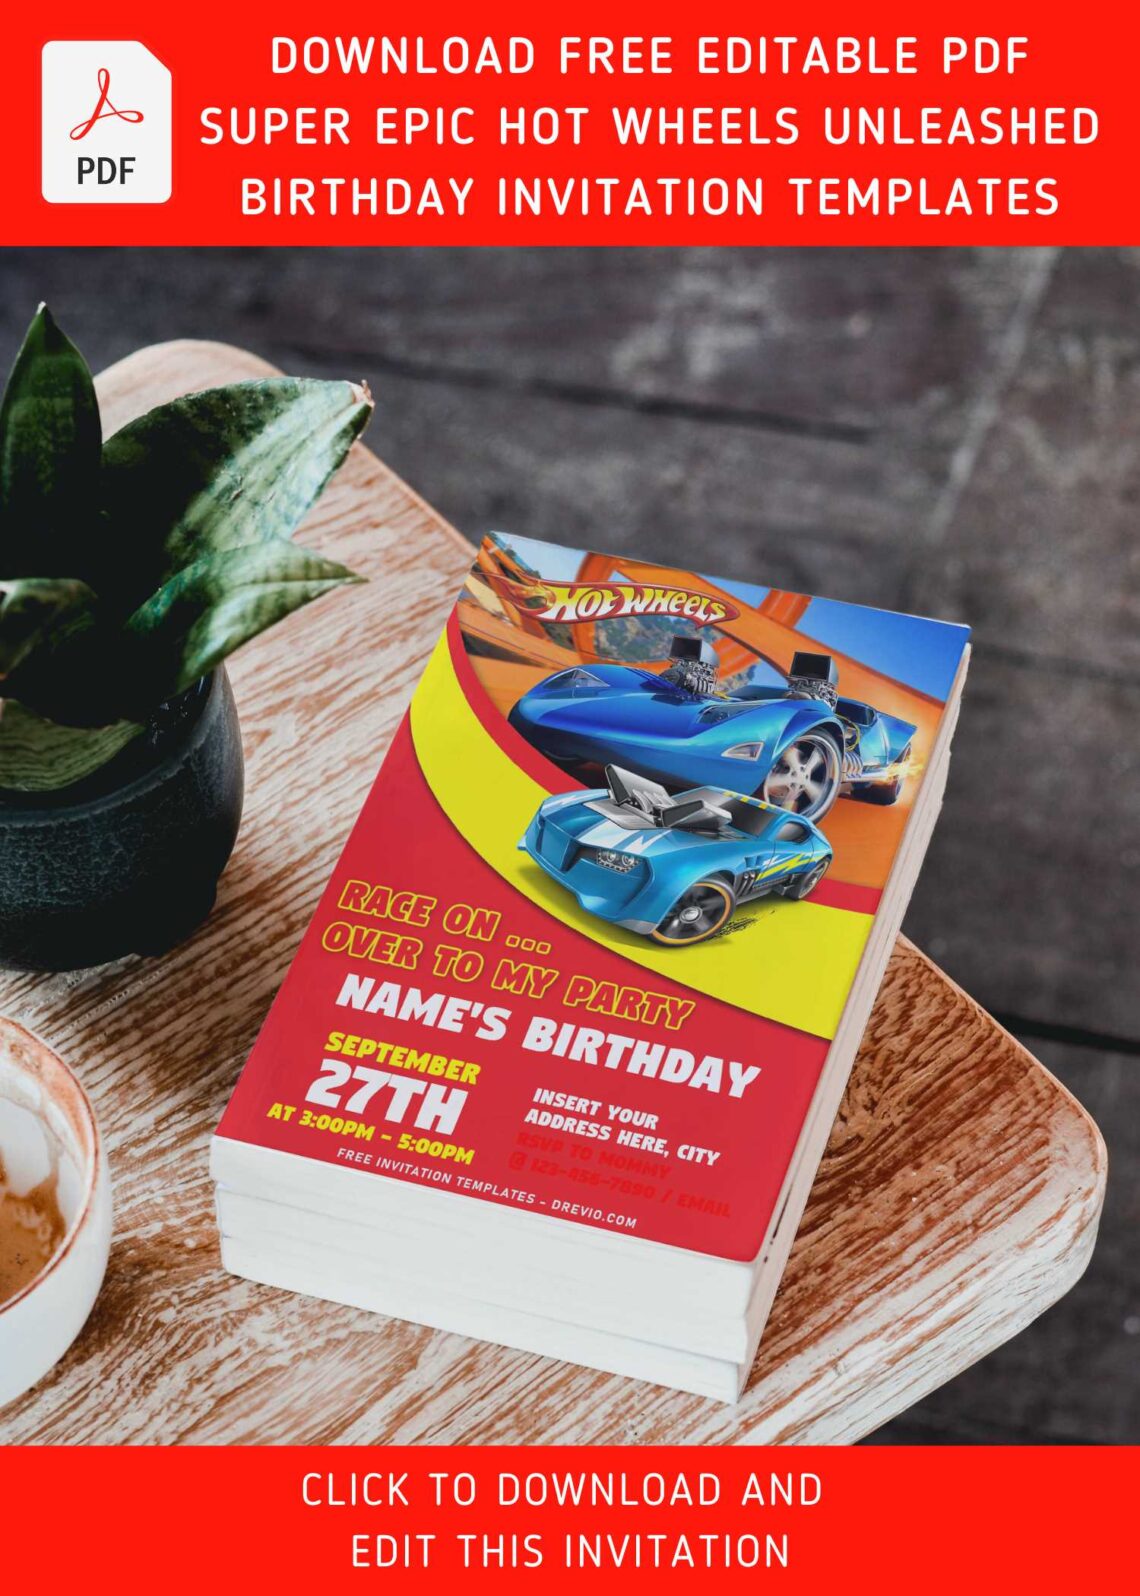 (Free Editable PDF) Hot Wheels Wild Racer Birthday Invitation Templates with colorful text